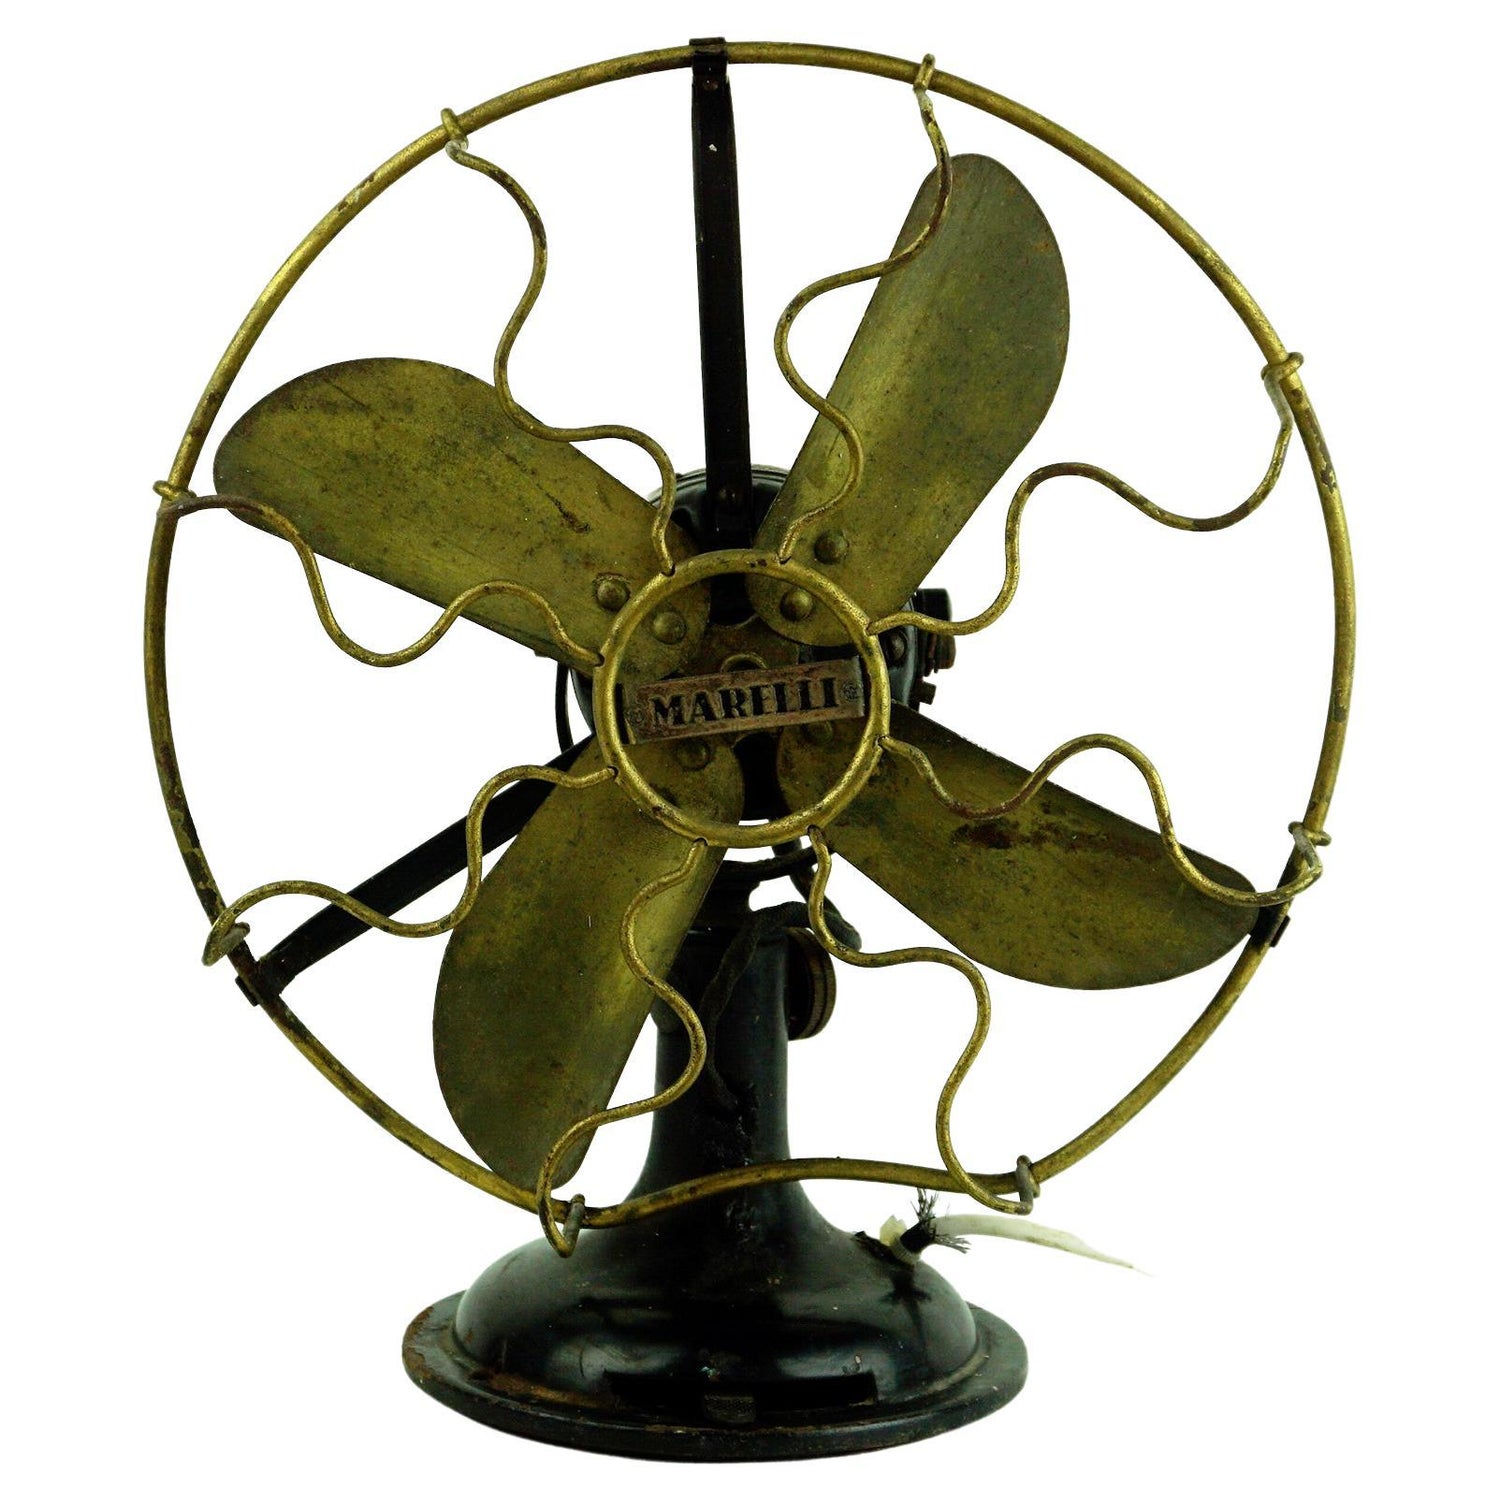 0riginal Vintage Industrial Art Deco Table Fan by Marelli Italy For Sale at  1stDibs